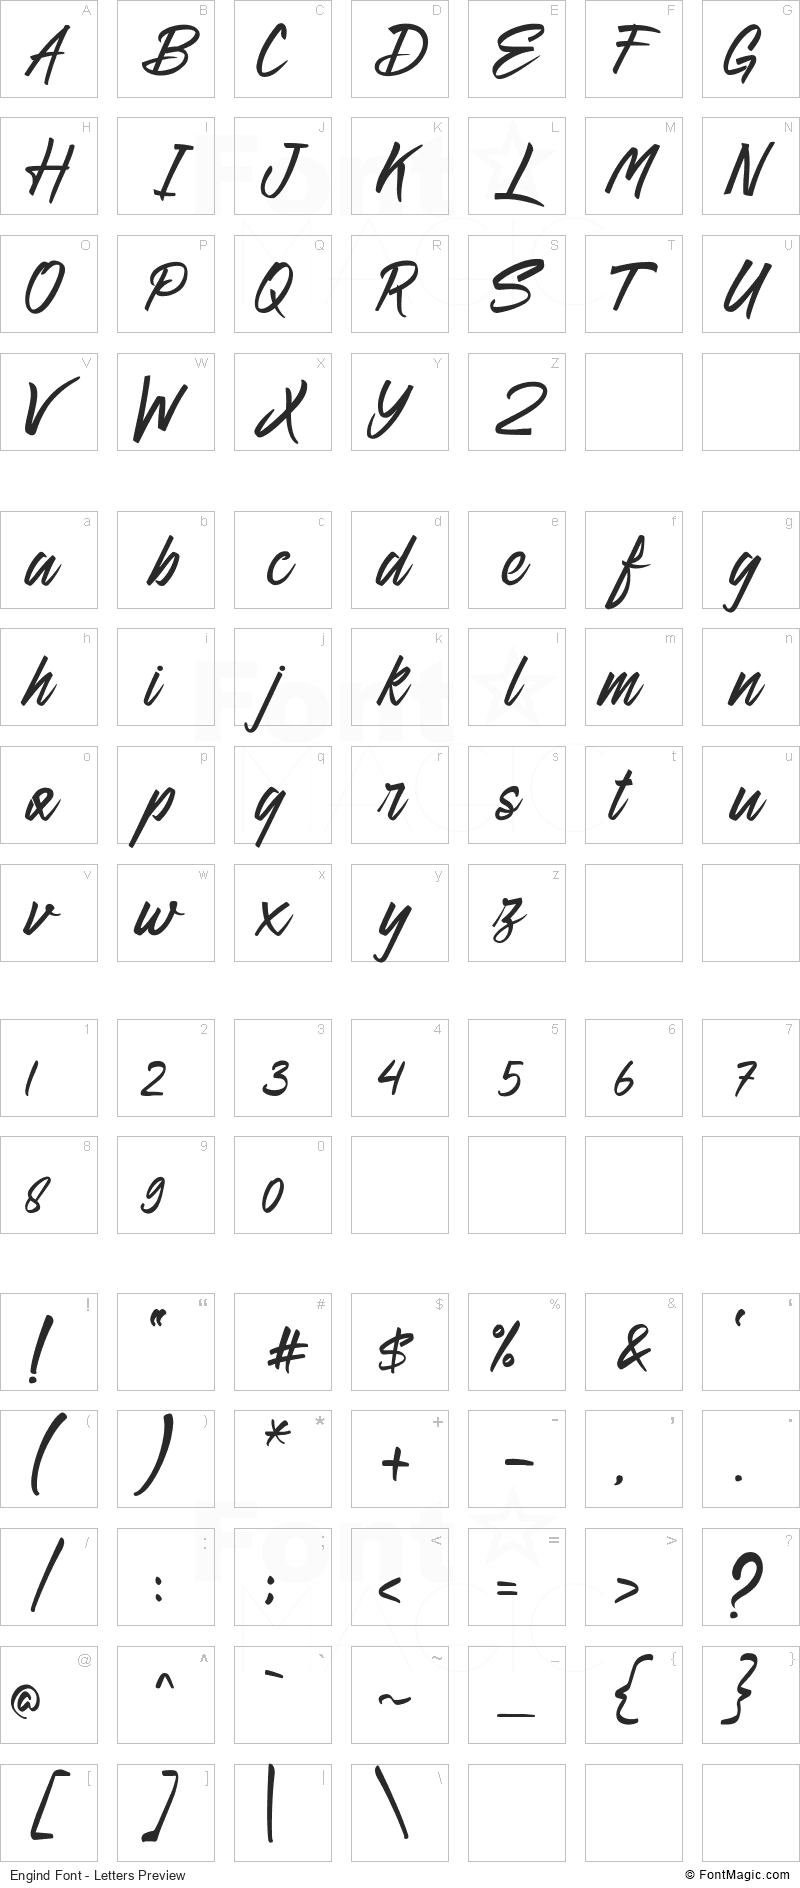 Engind Font - All Latters Preview Chart